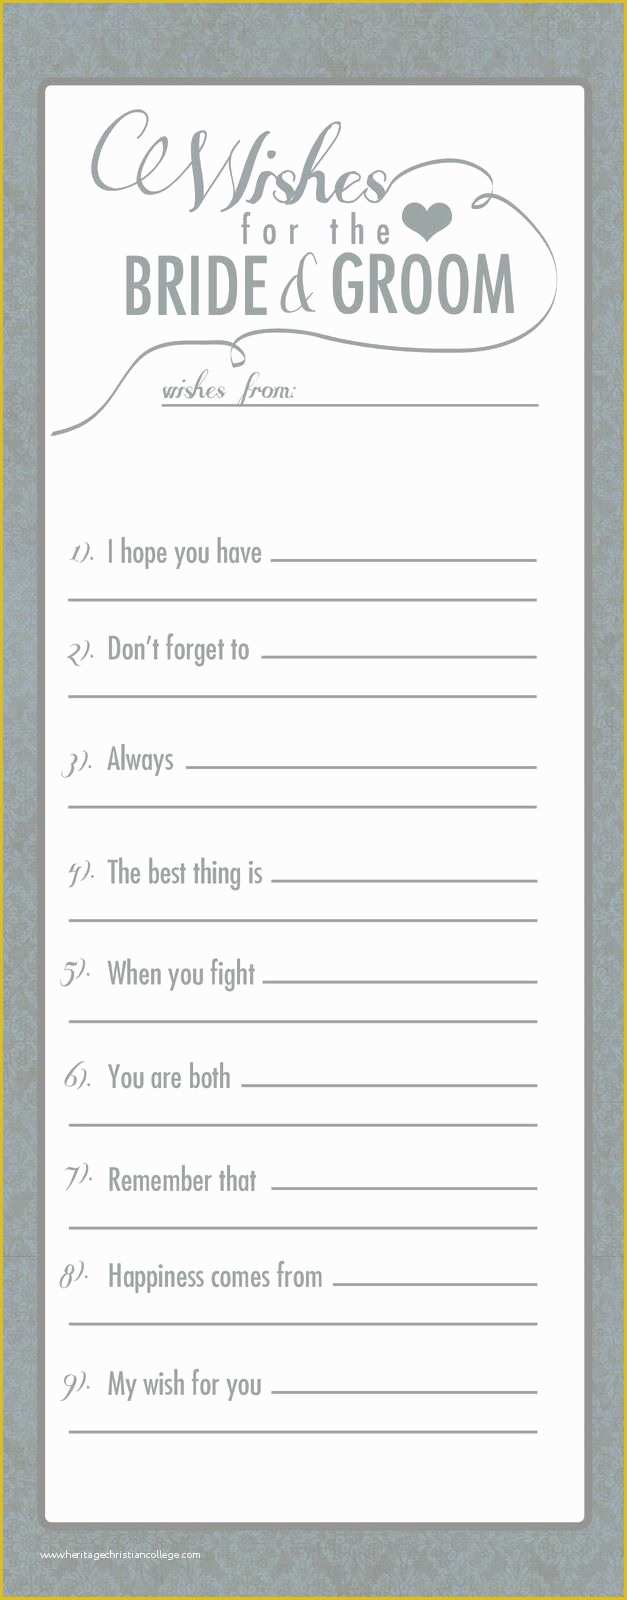 Free Groomsman Card Template Of 17 Best Ideas About Advice Cards On Pinterest